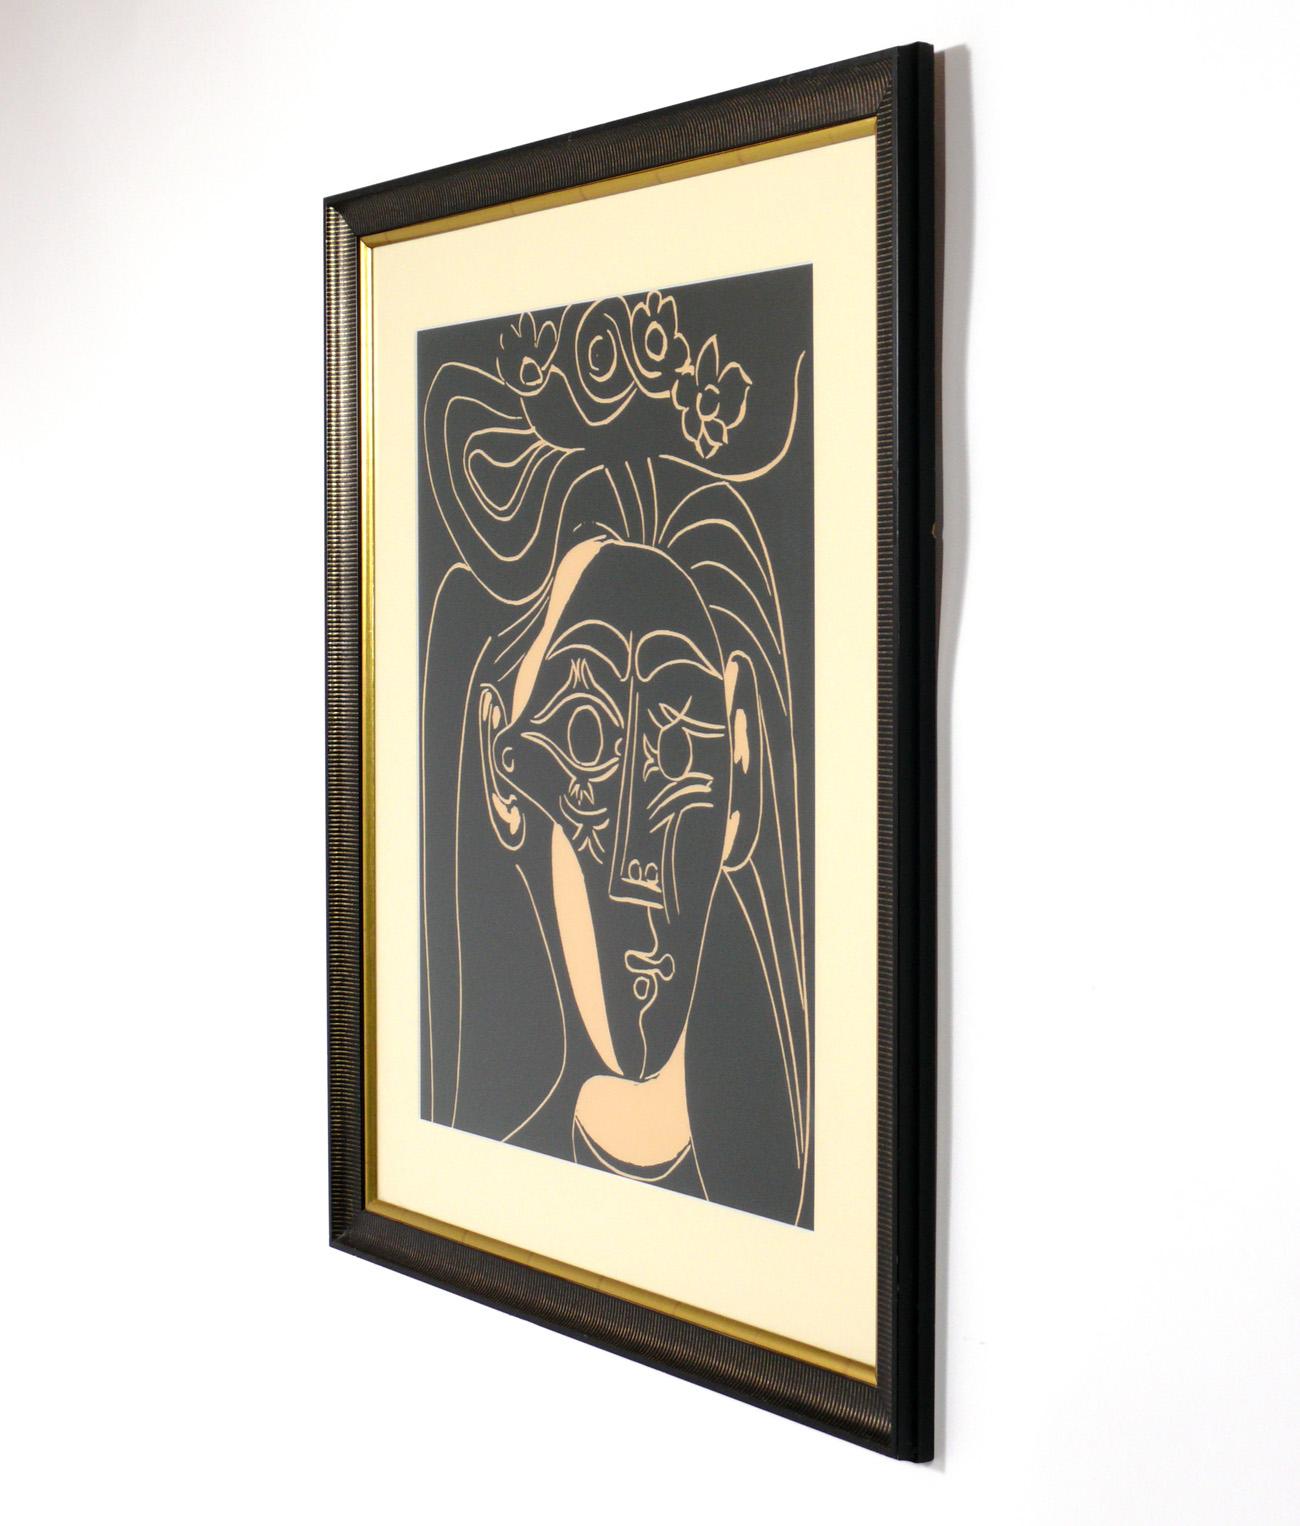 picasso prints for sale